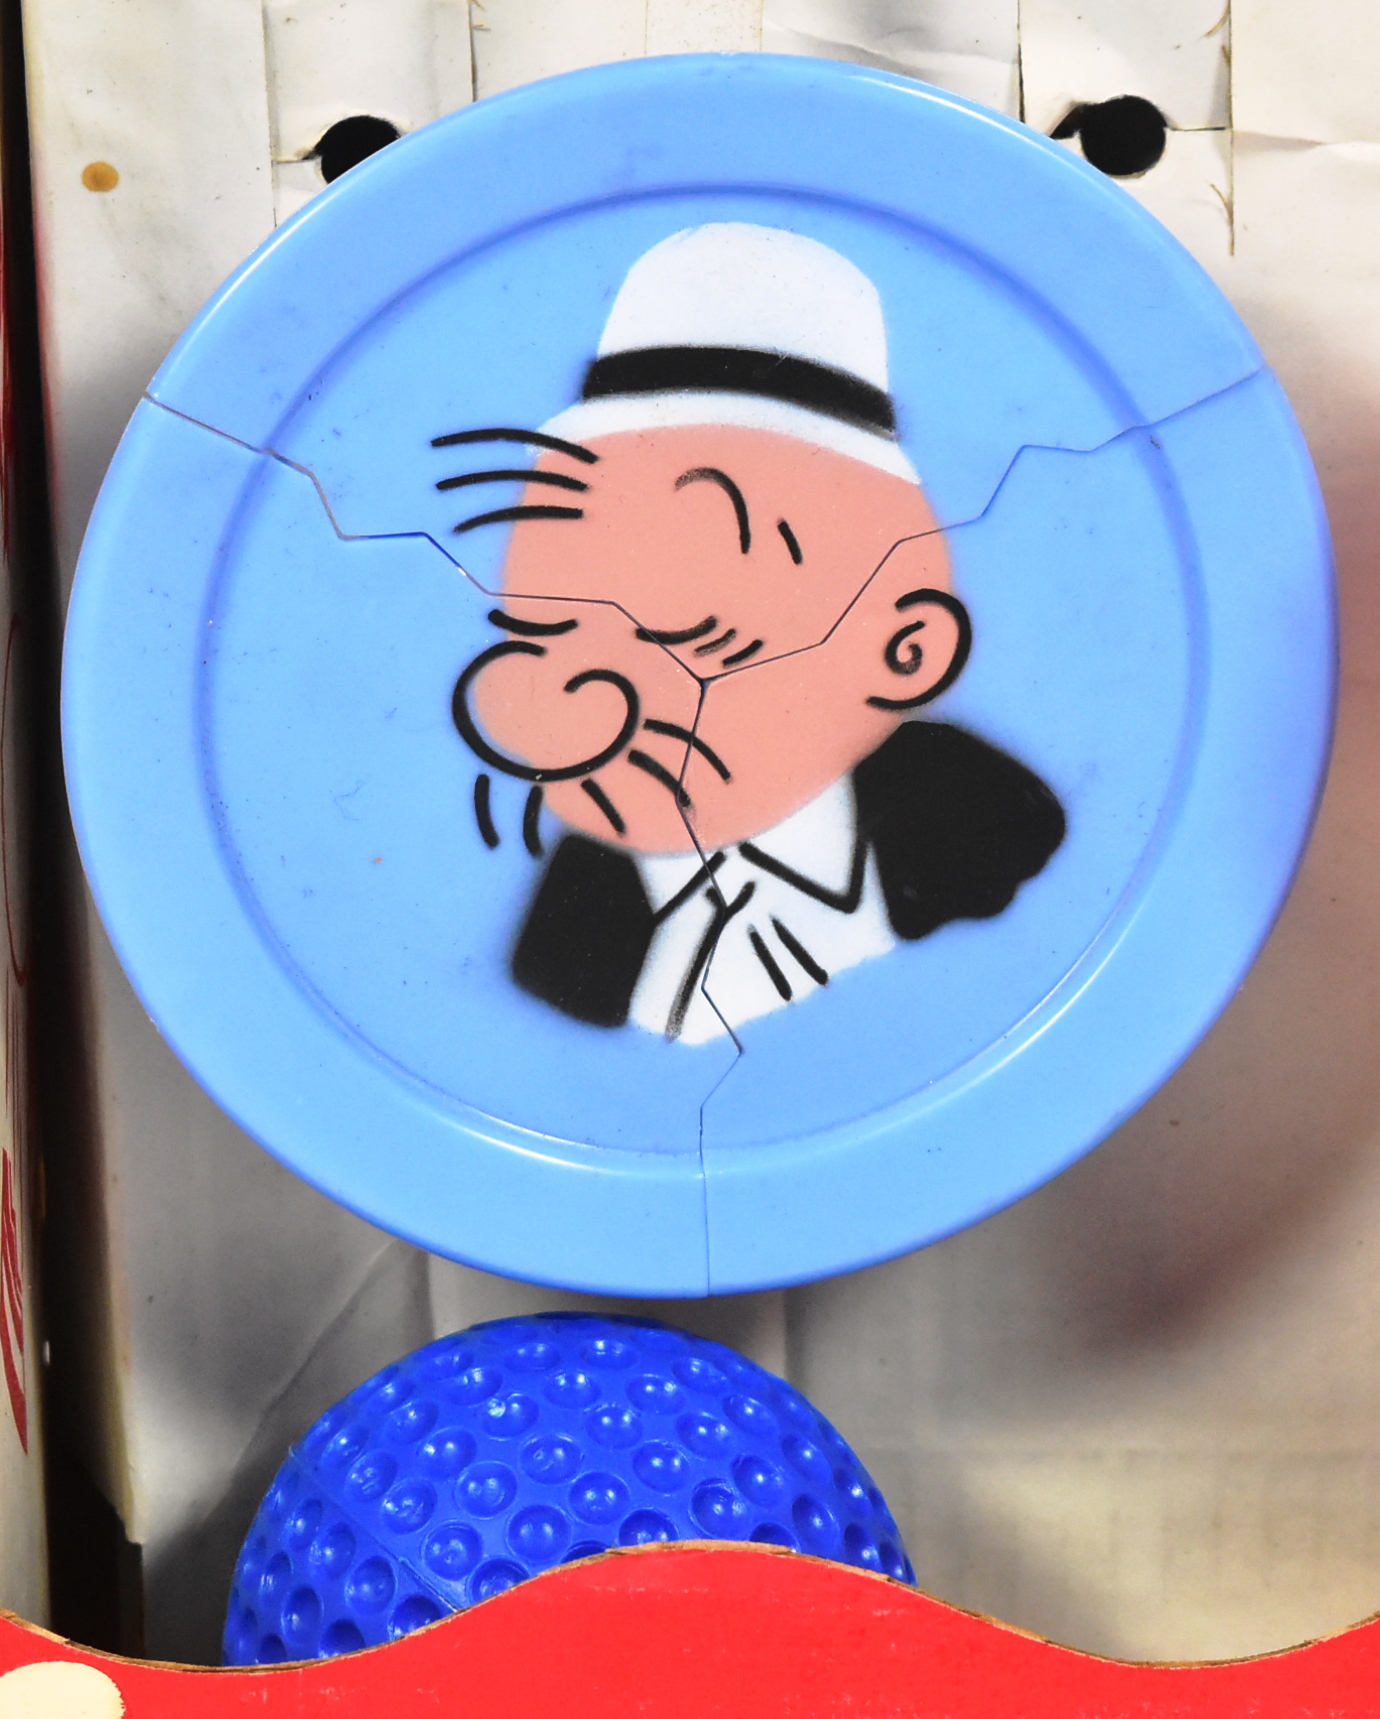 POPEYE - VINTAGE COMBEX POPEYE BREAK A PLATE GAME - Image 3 of 5